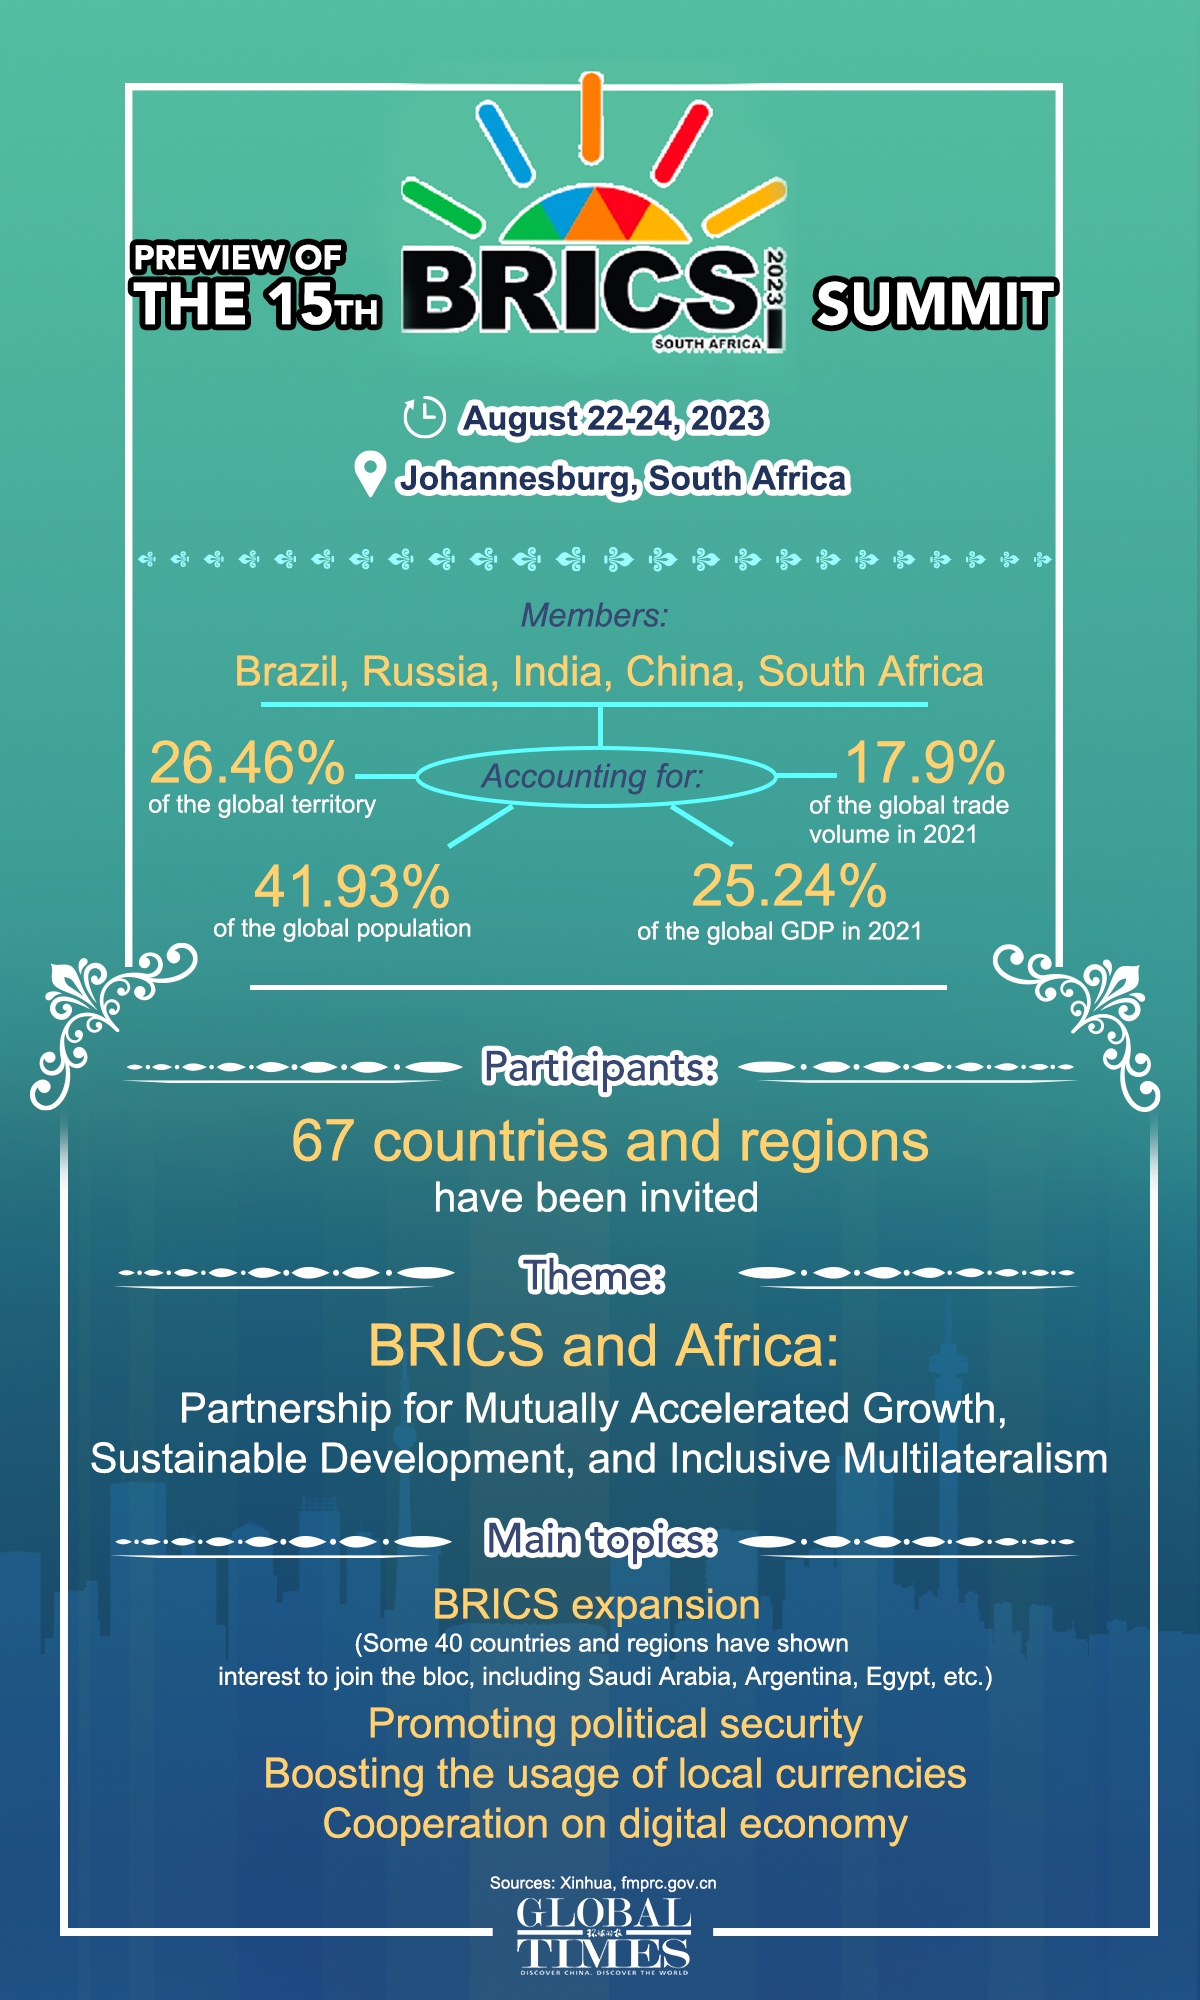 Preview of the 15th BRICS Summit